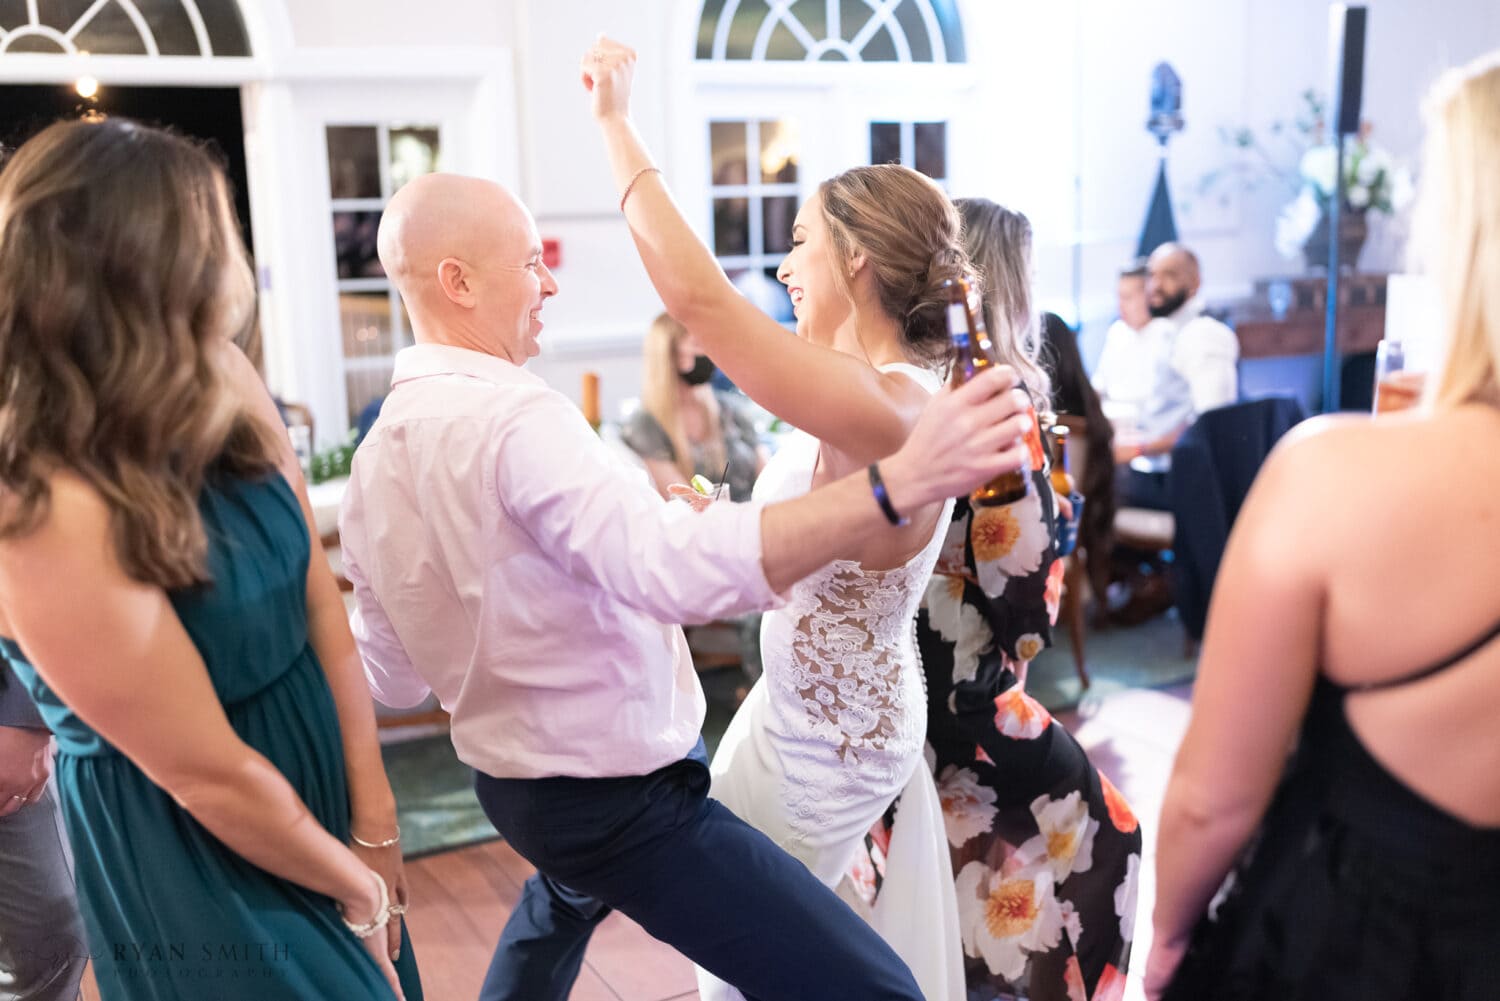 Getting wild on the dance floor - Kimbels at Wachesaw Plantation